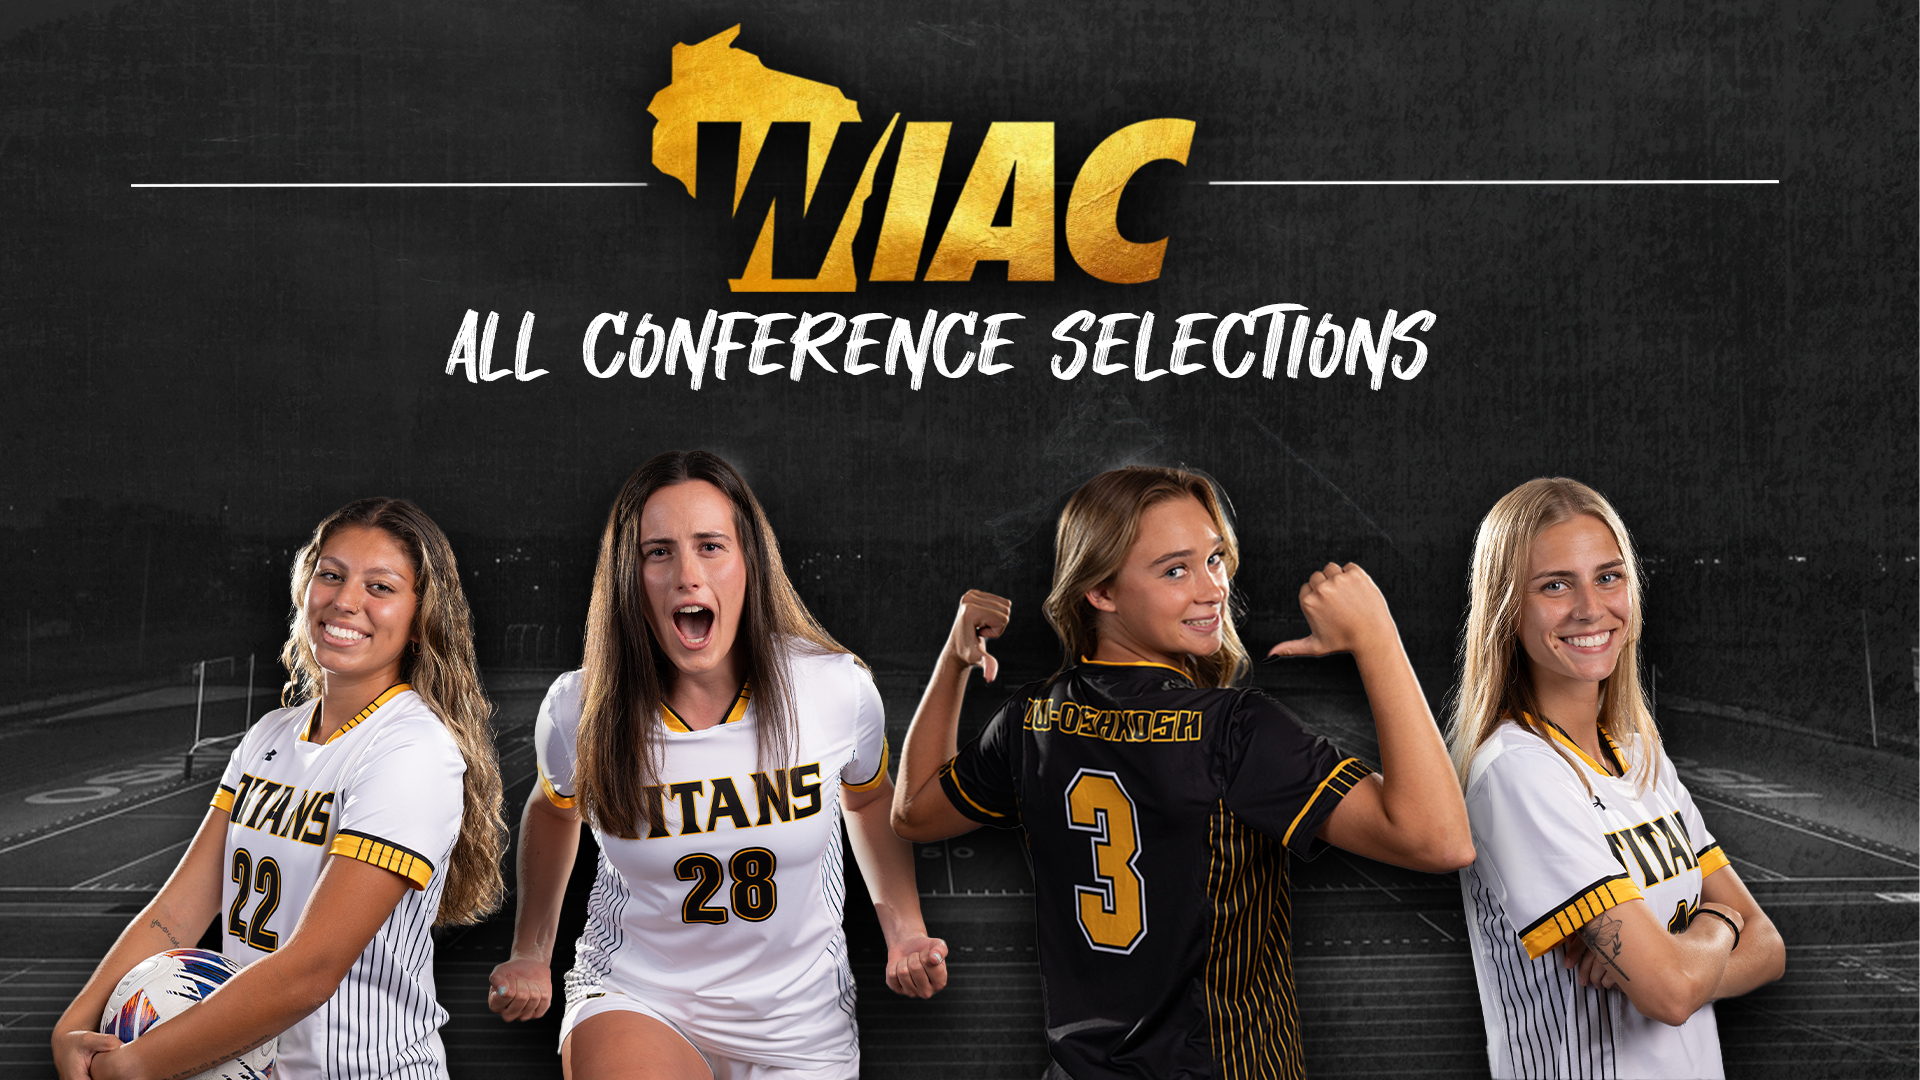 Alex Lopez, Kate Whitney, Lauren Silvestri and Molly Jackson are the Titans' 2023 All-WIAC selections